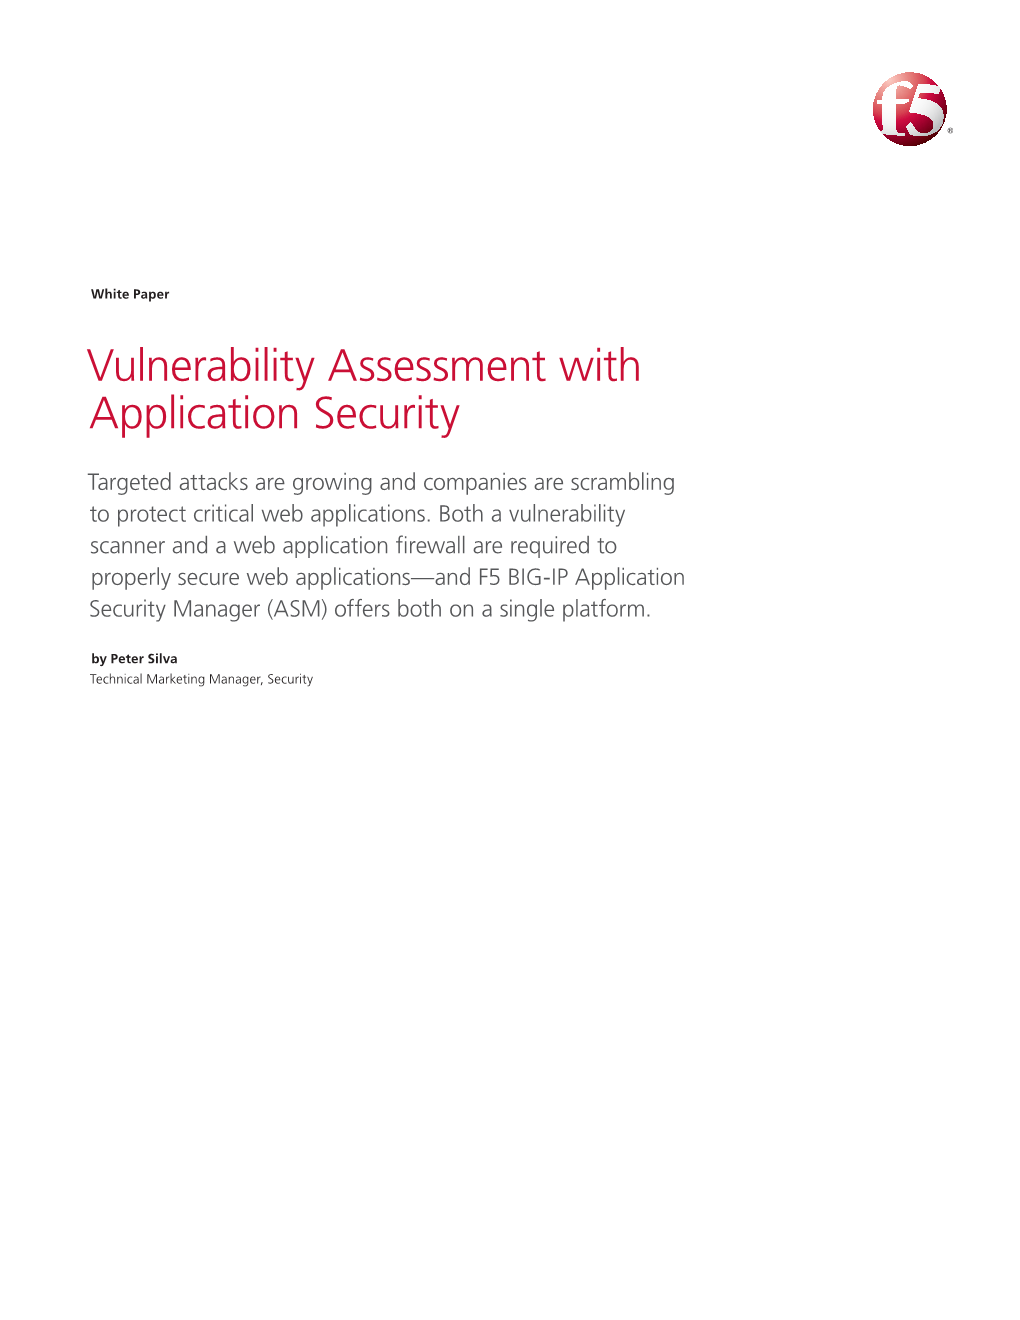 Vulnerability Assessment with Application Security